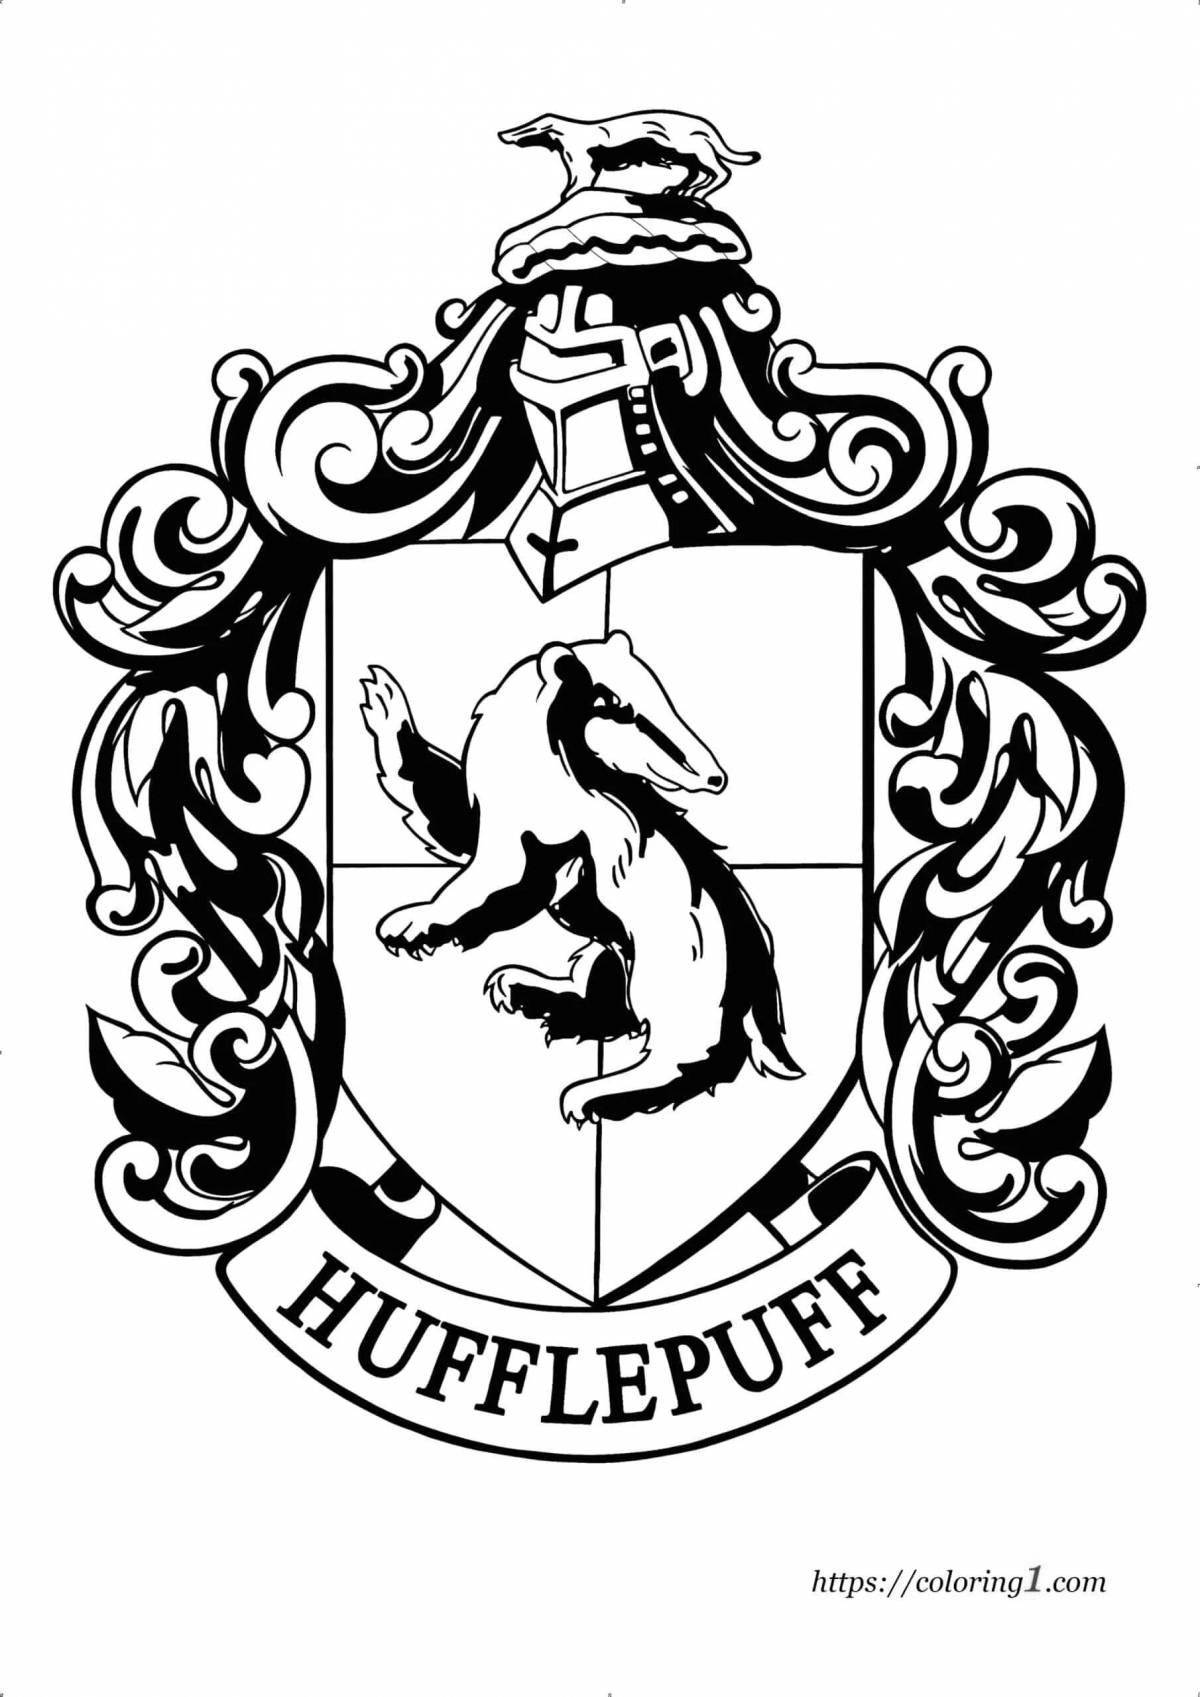 Slytherin's imposing coat of arms coloring page